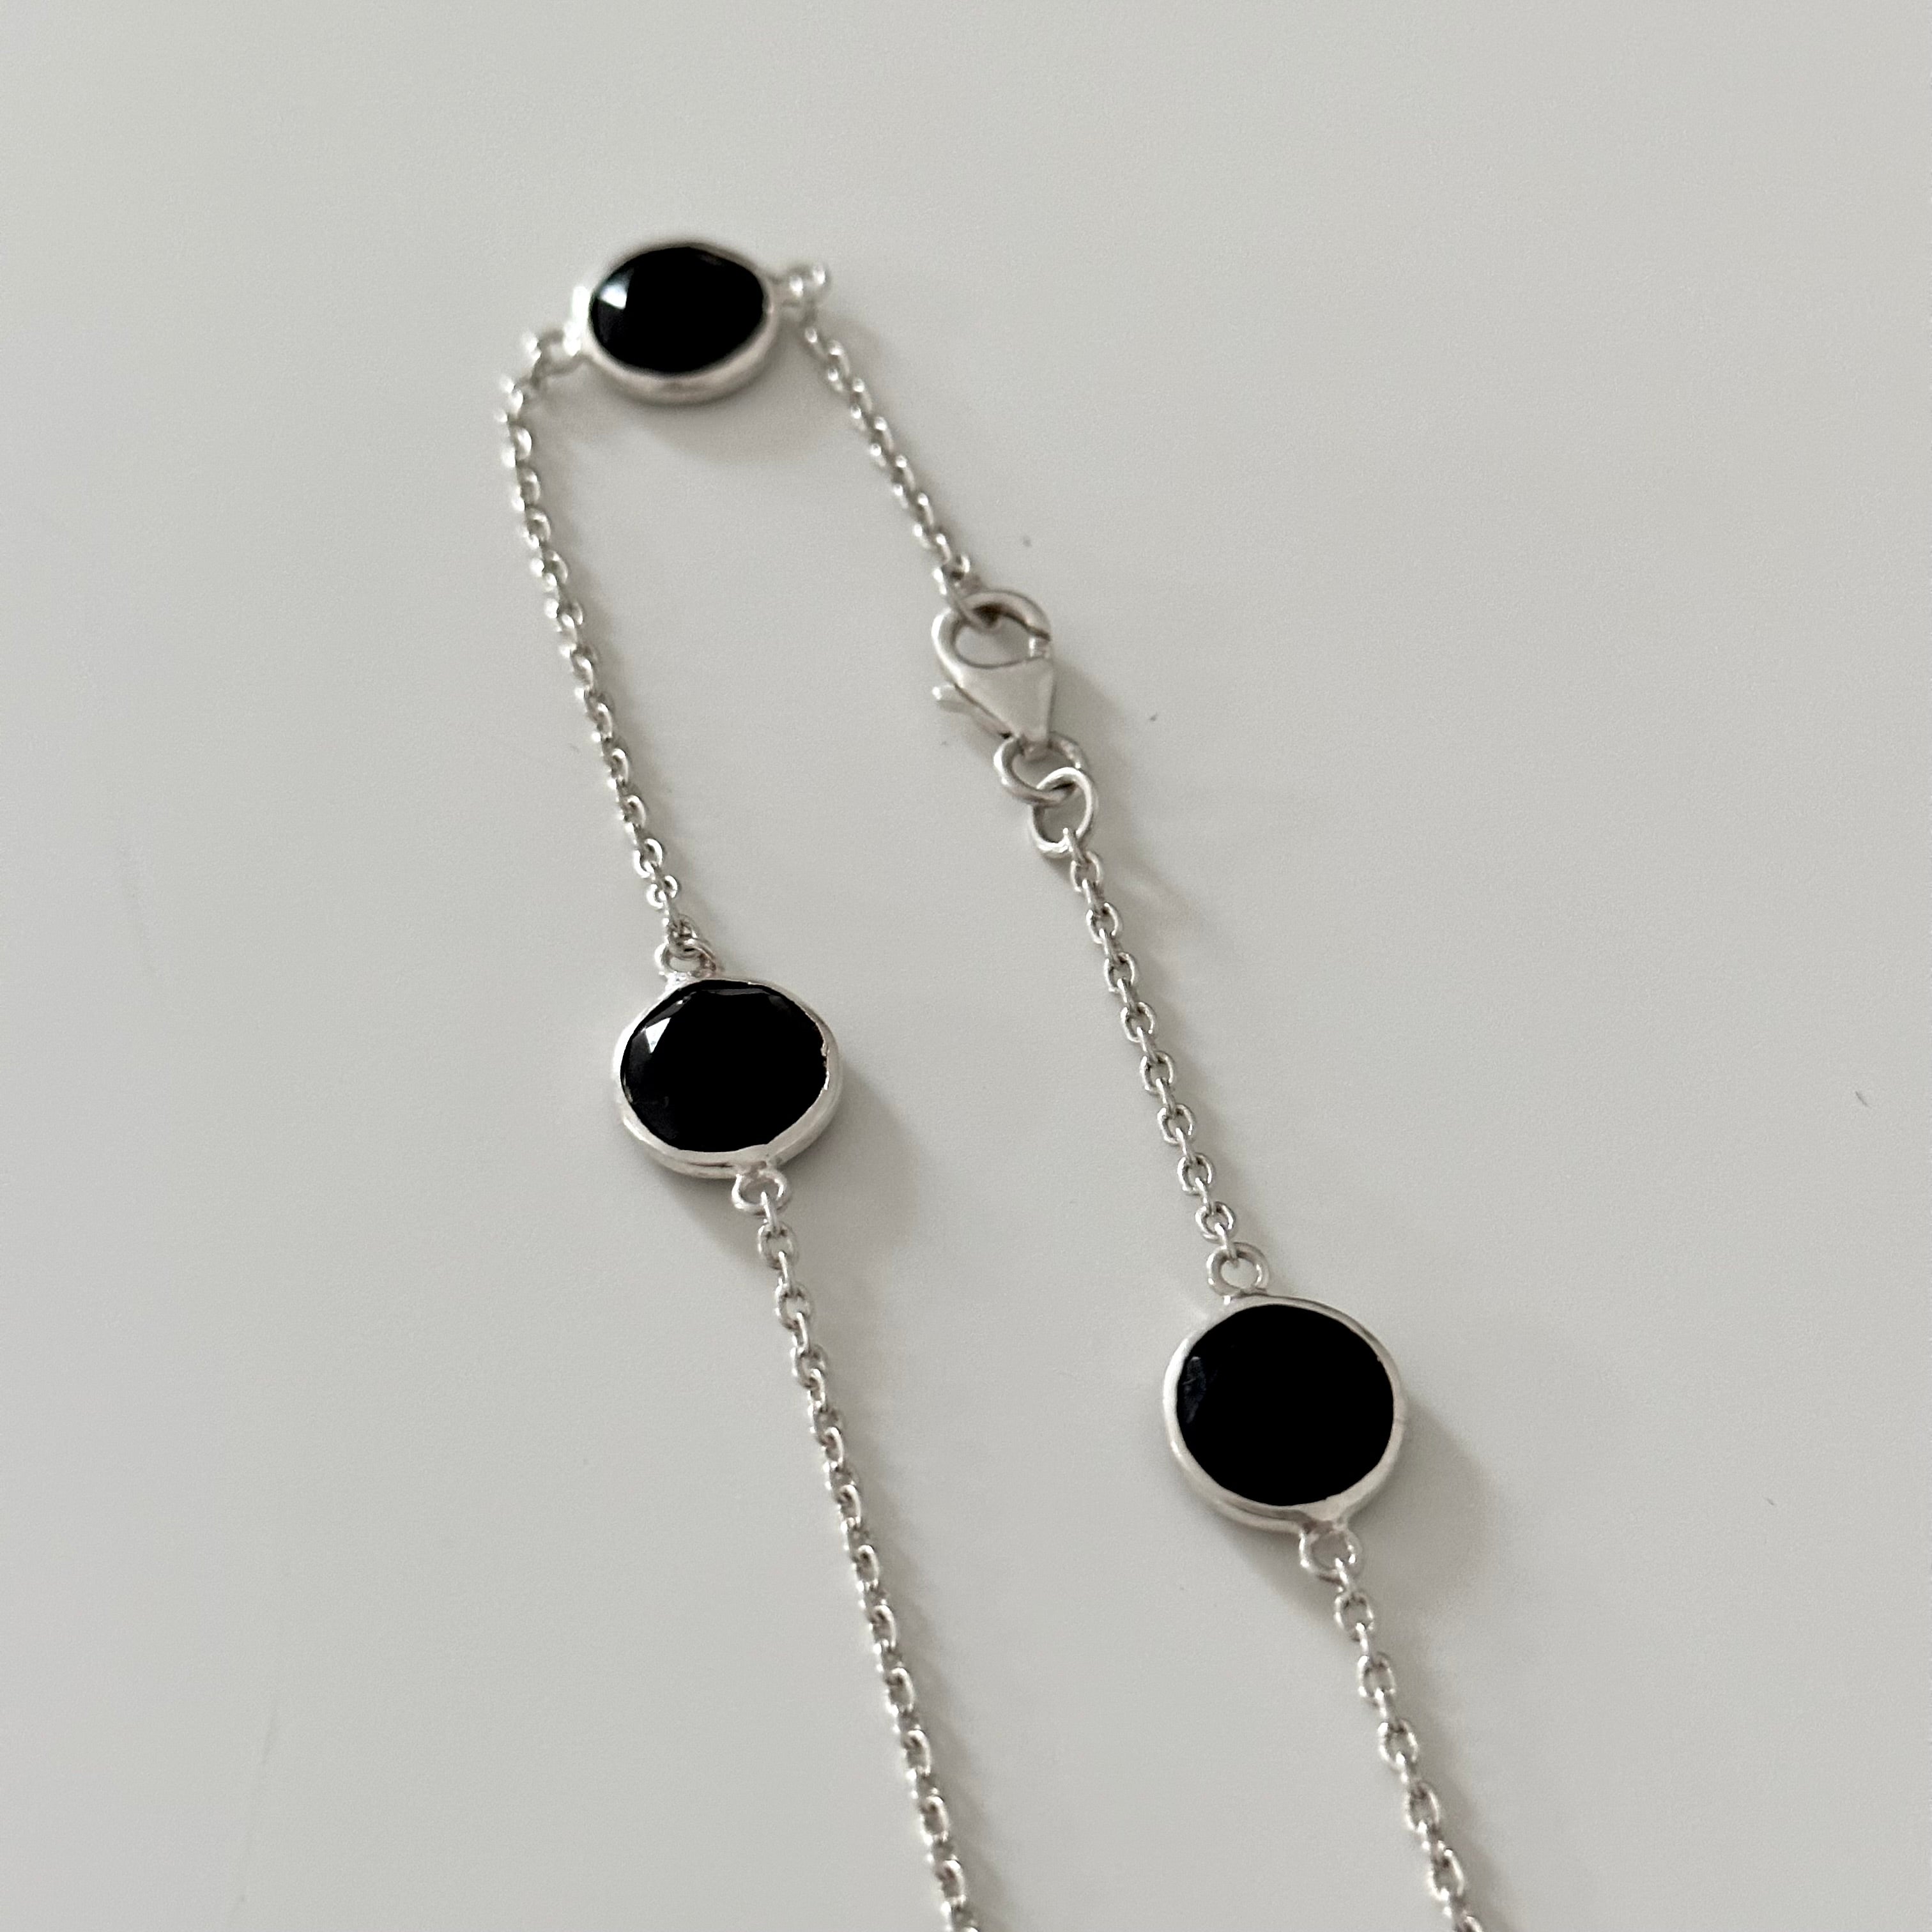 Black Onyx Gemstone Necklace in Sterling Silver